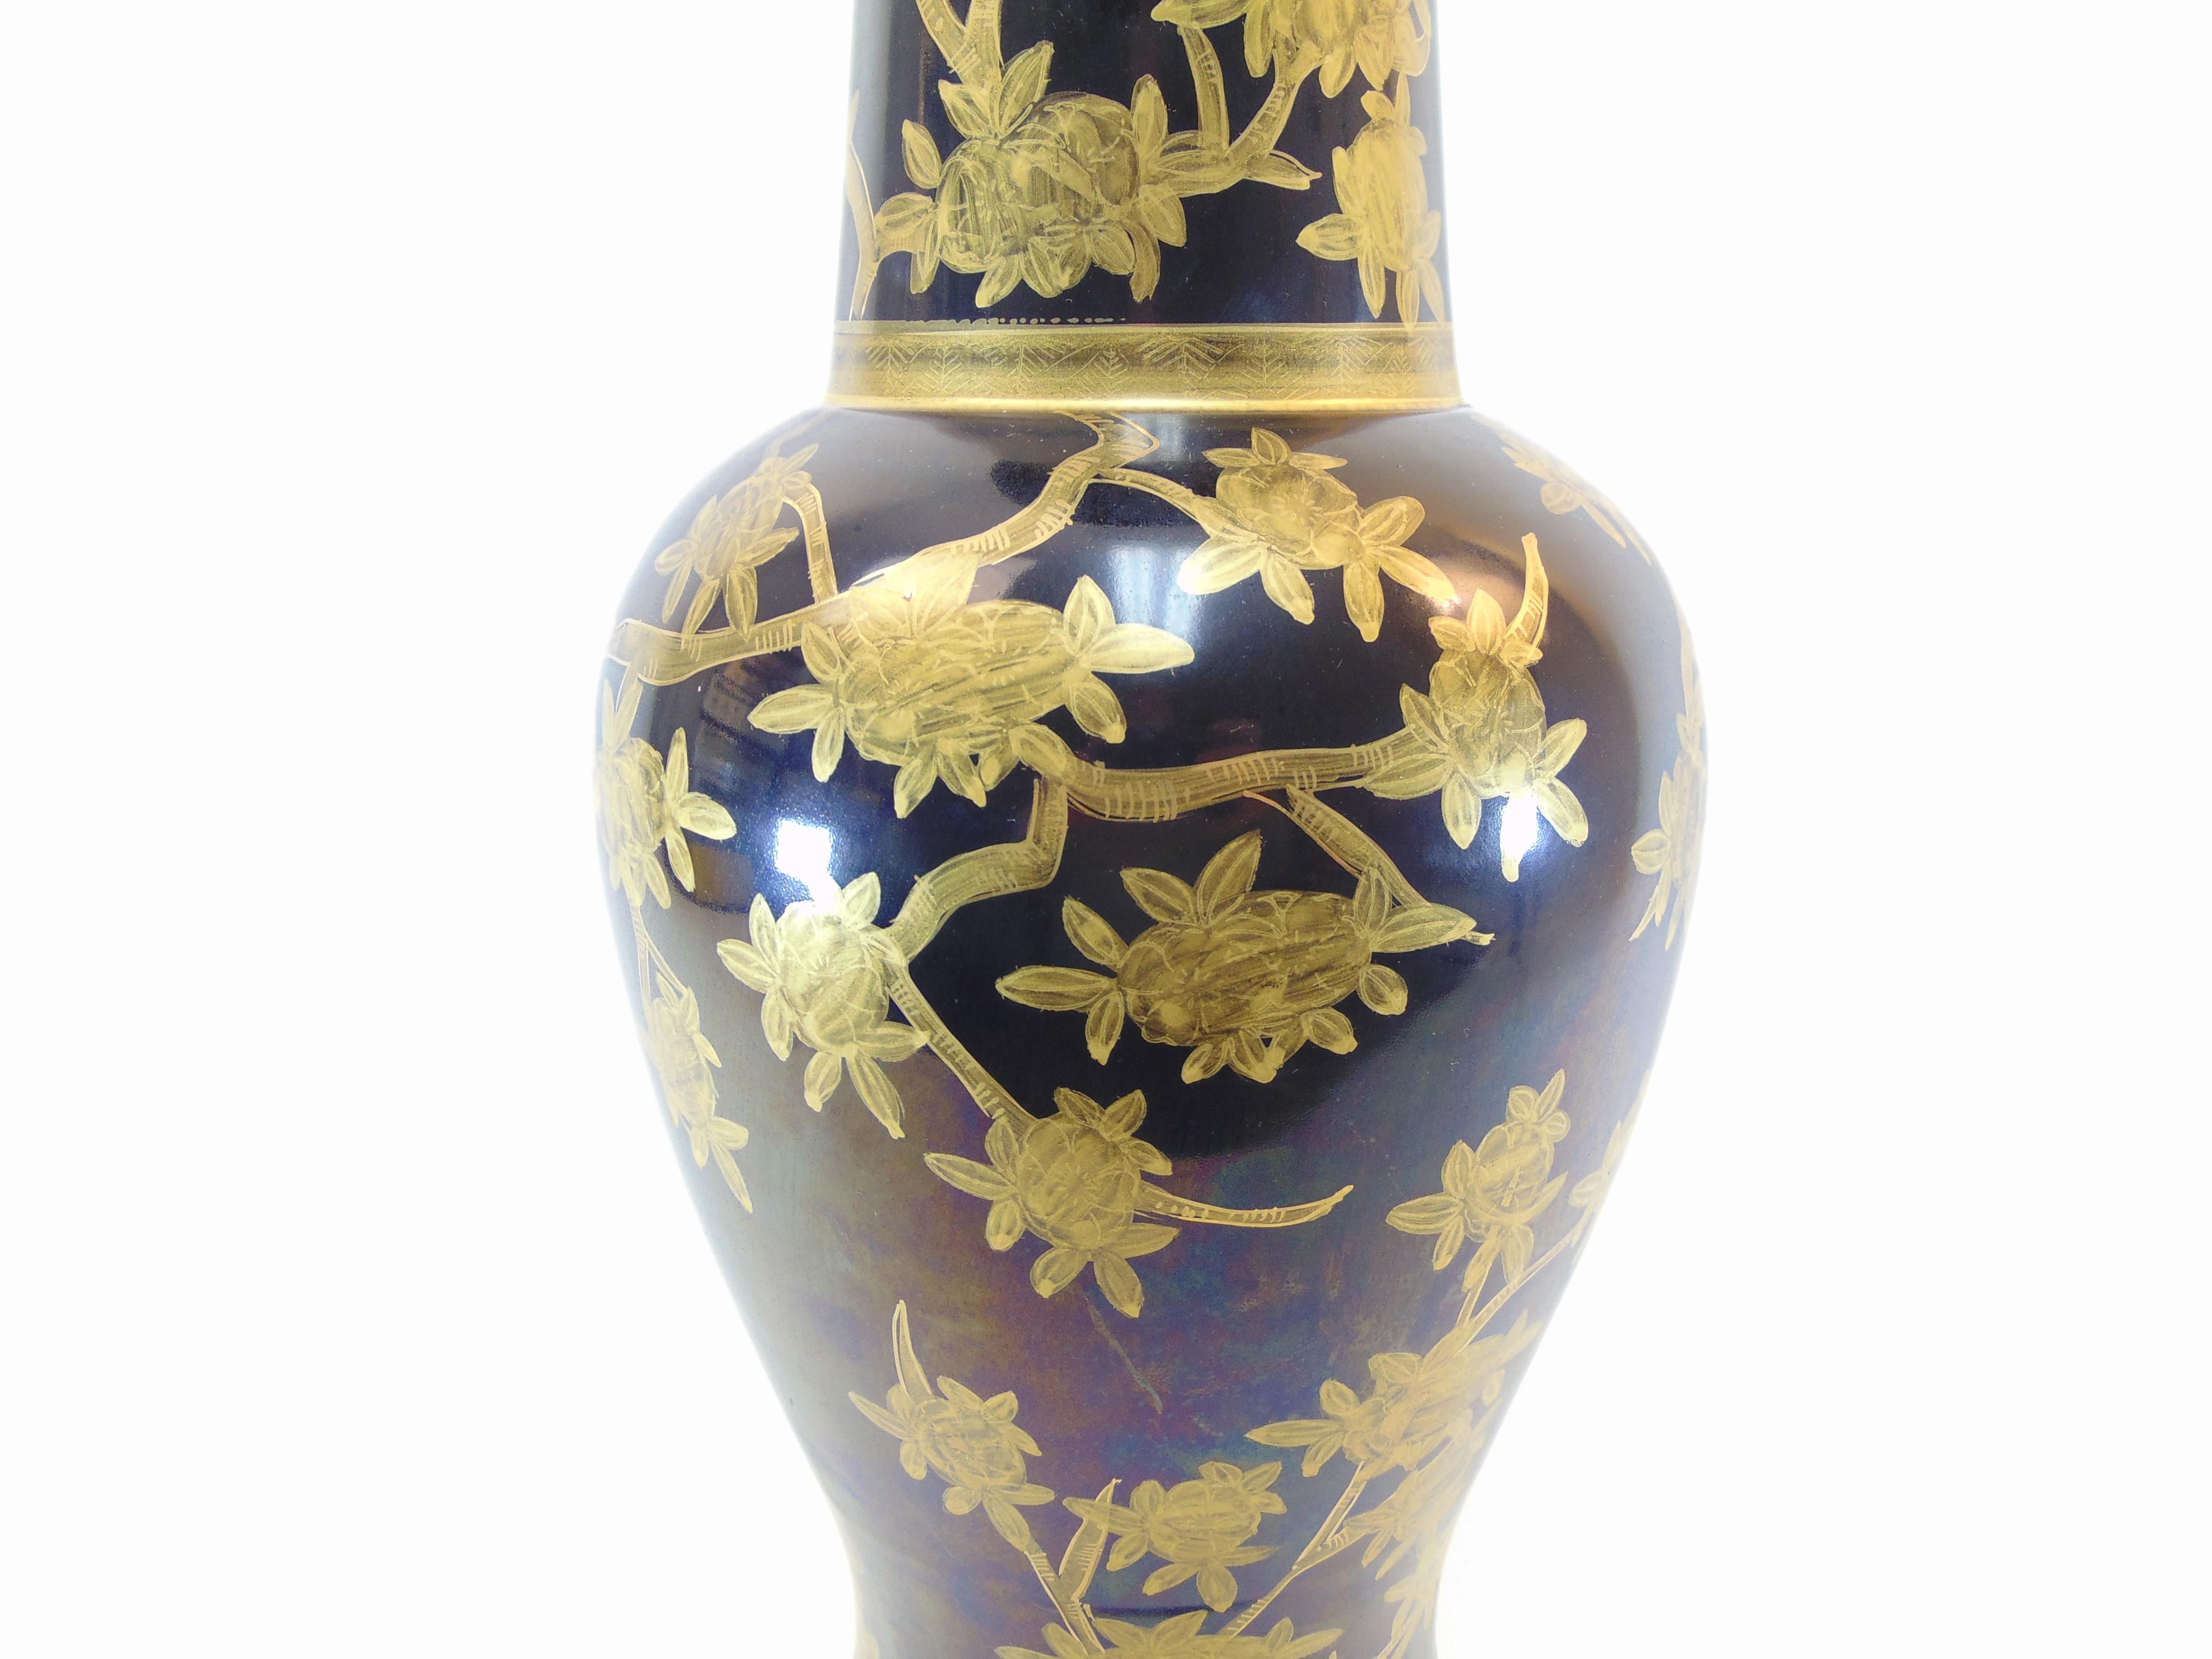 Asian Style Ceramic and Gold Painted Vintage Lamp by Paul Hanson In Good Condition For Sale In Tulsa, OK